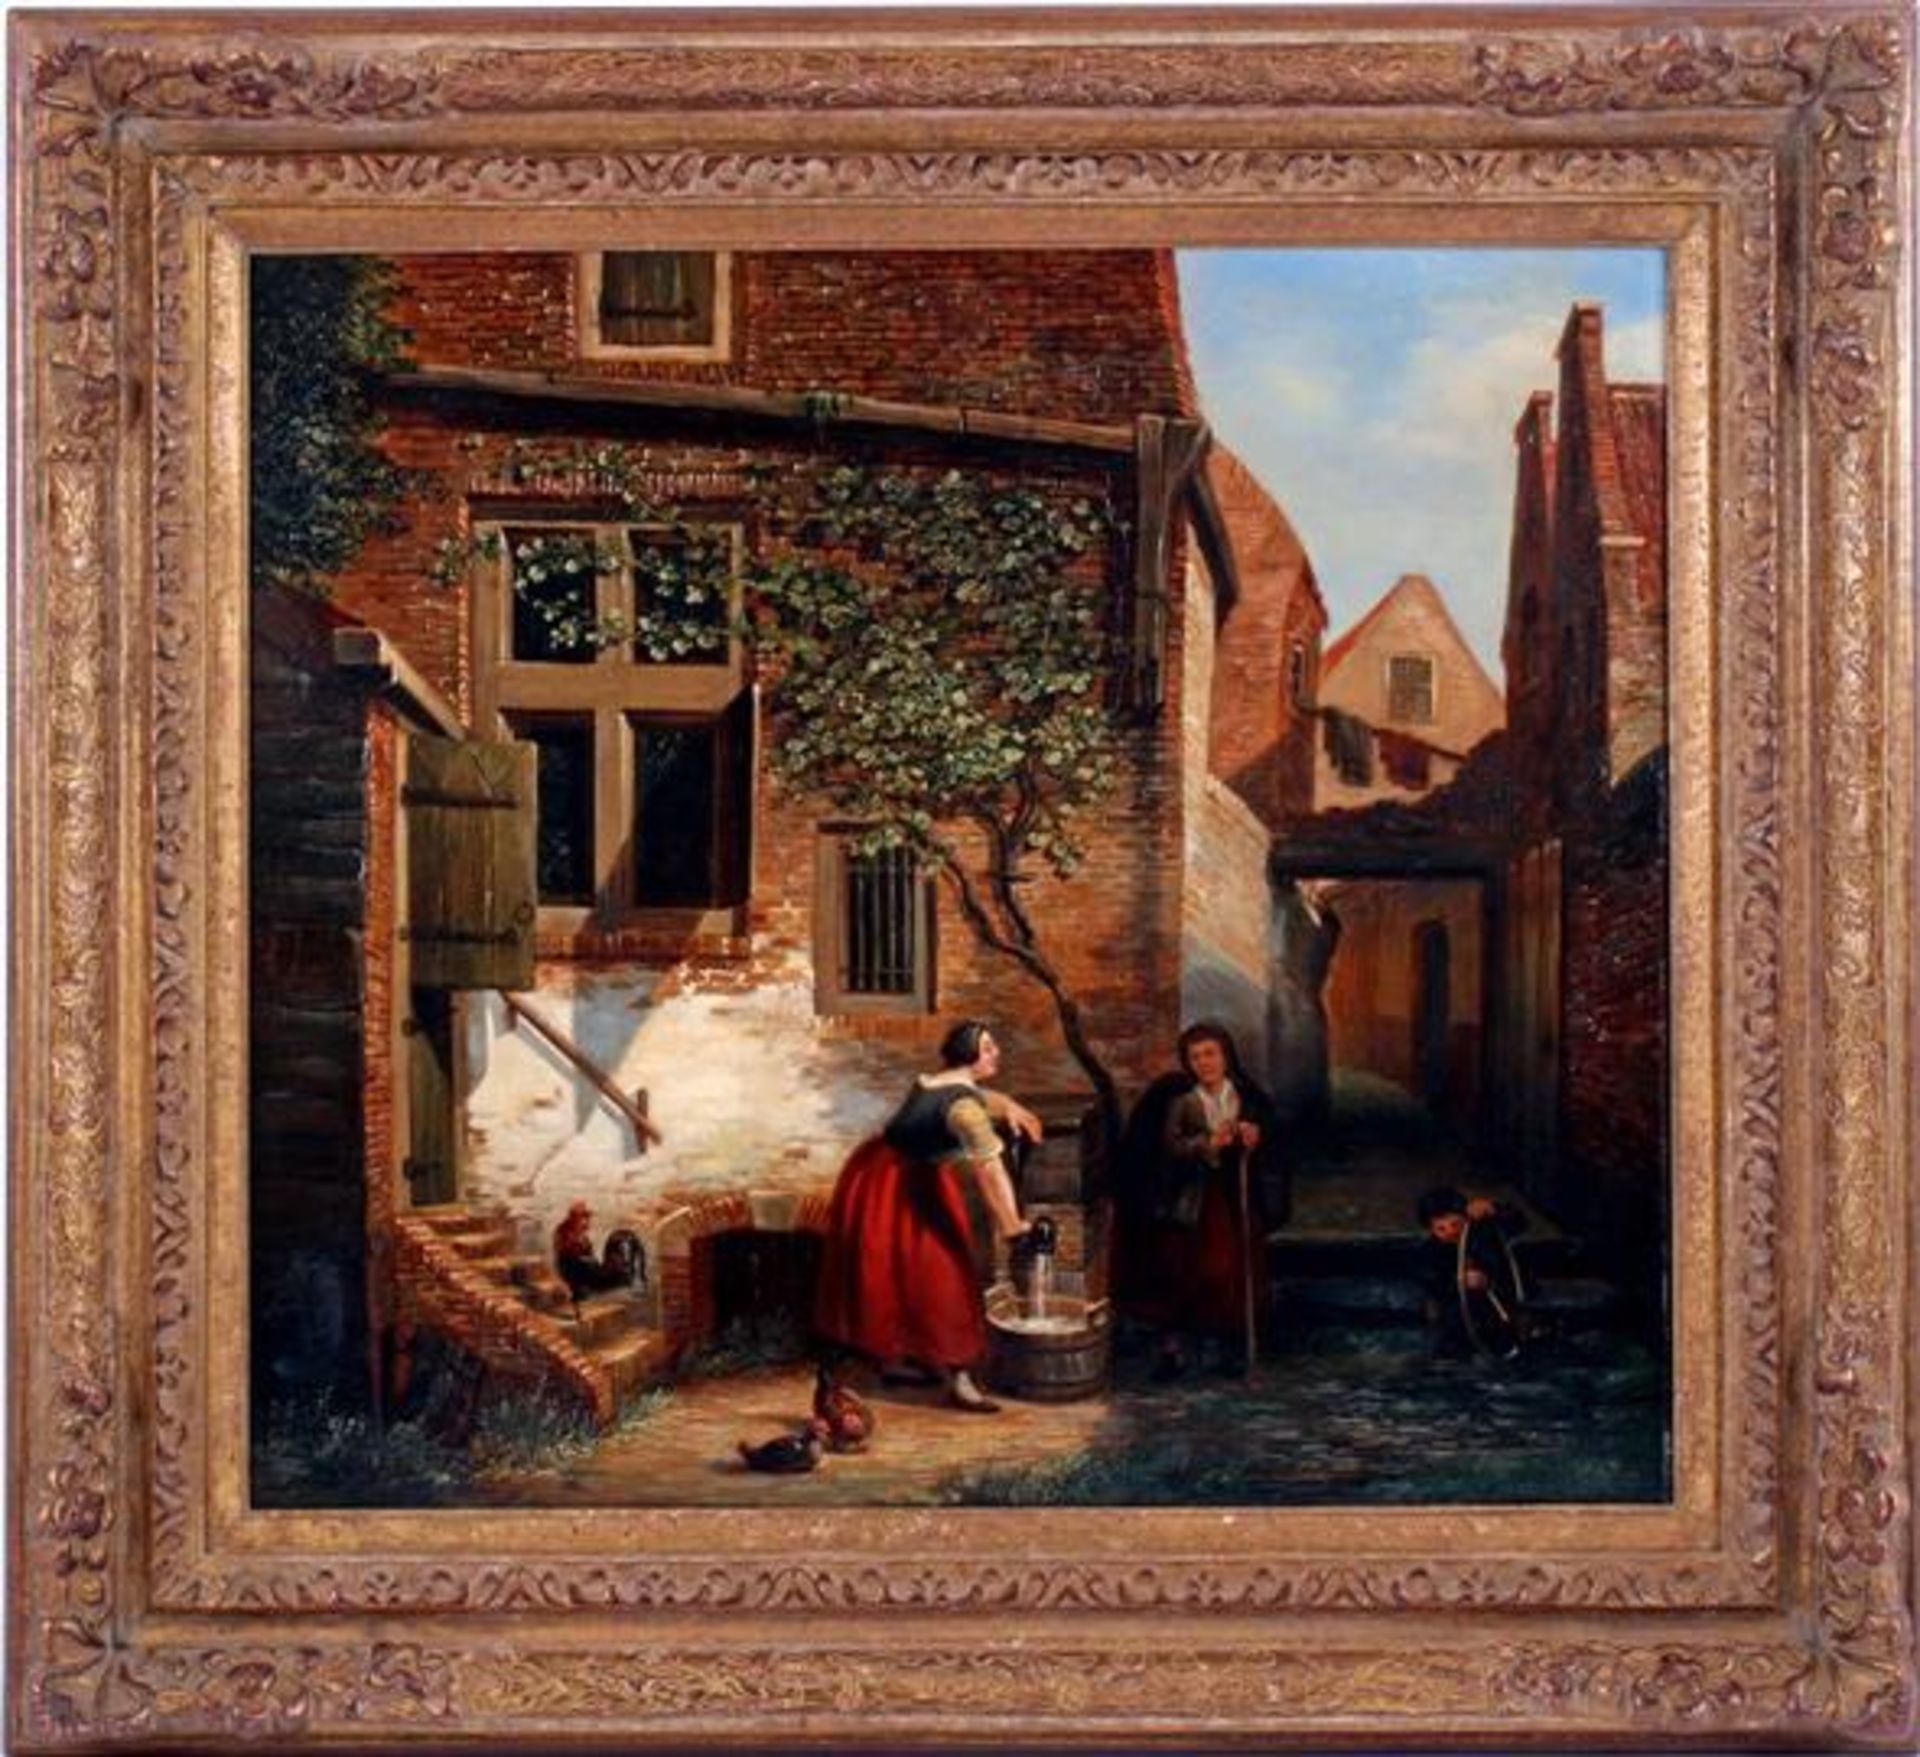 Signed M Savry, Scene in courtyard with woman with pump talking to woman with cloak, boy playing